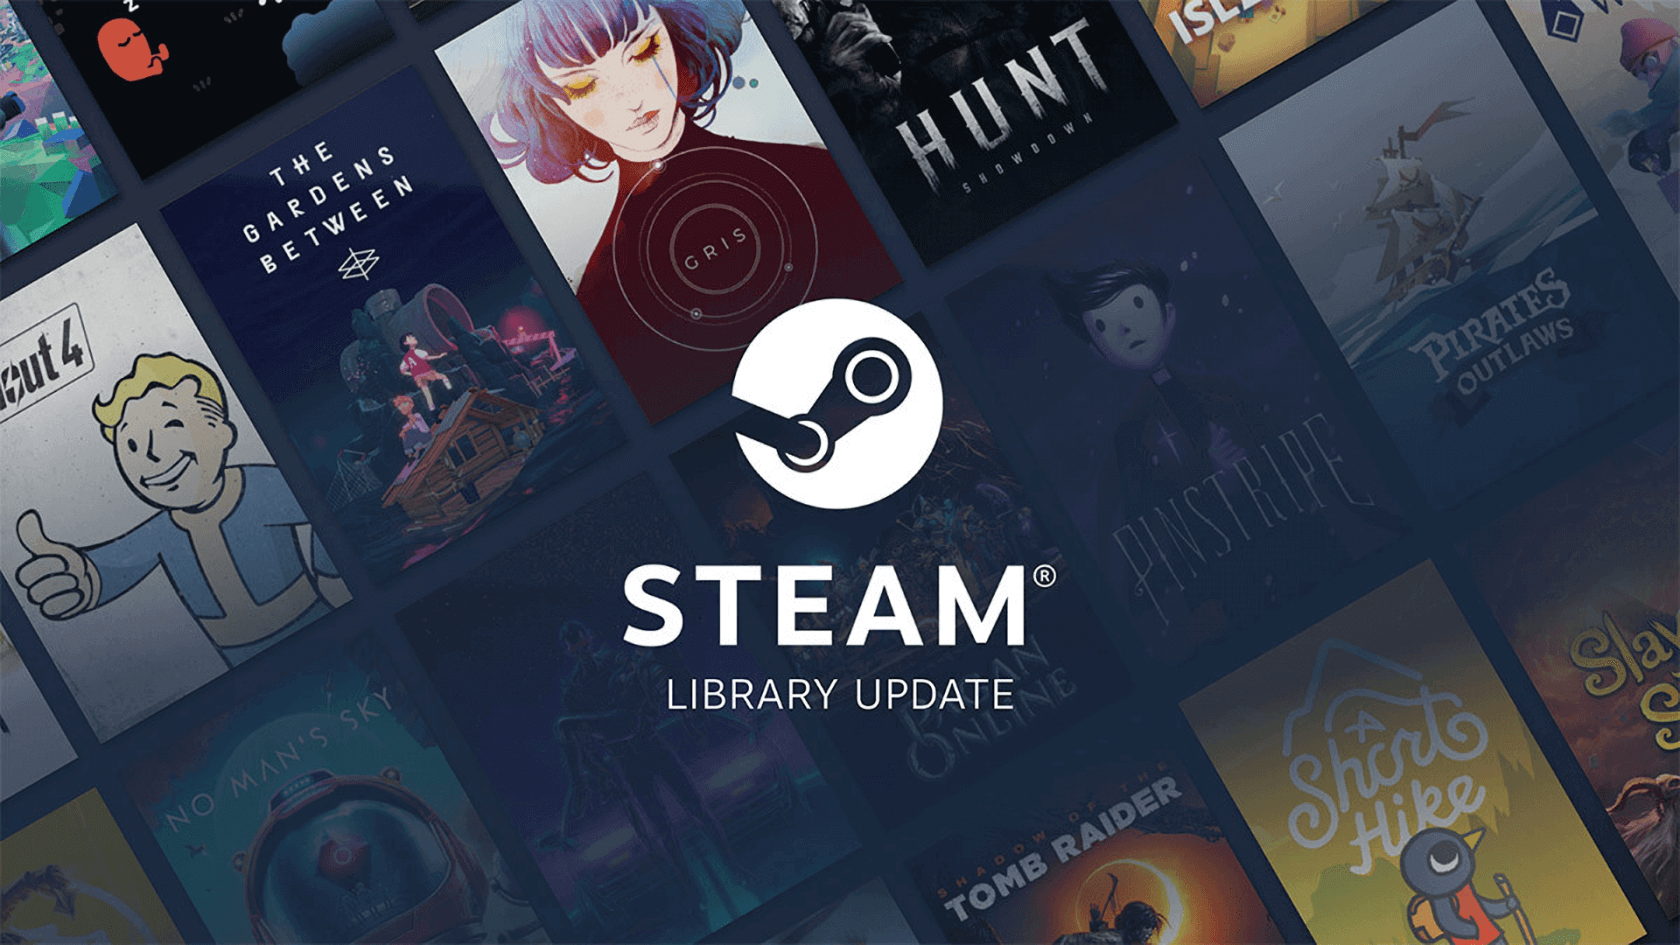 The Steam Library update is now live in public beta